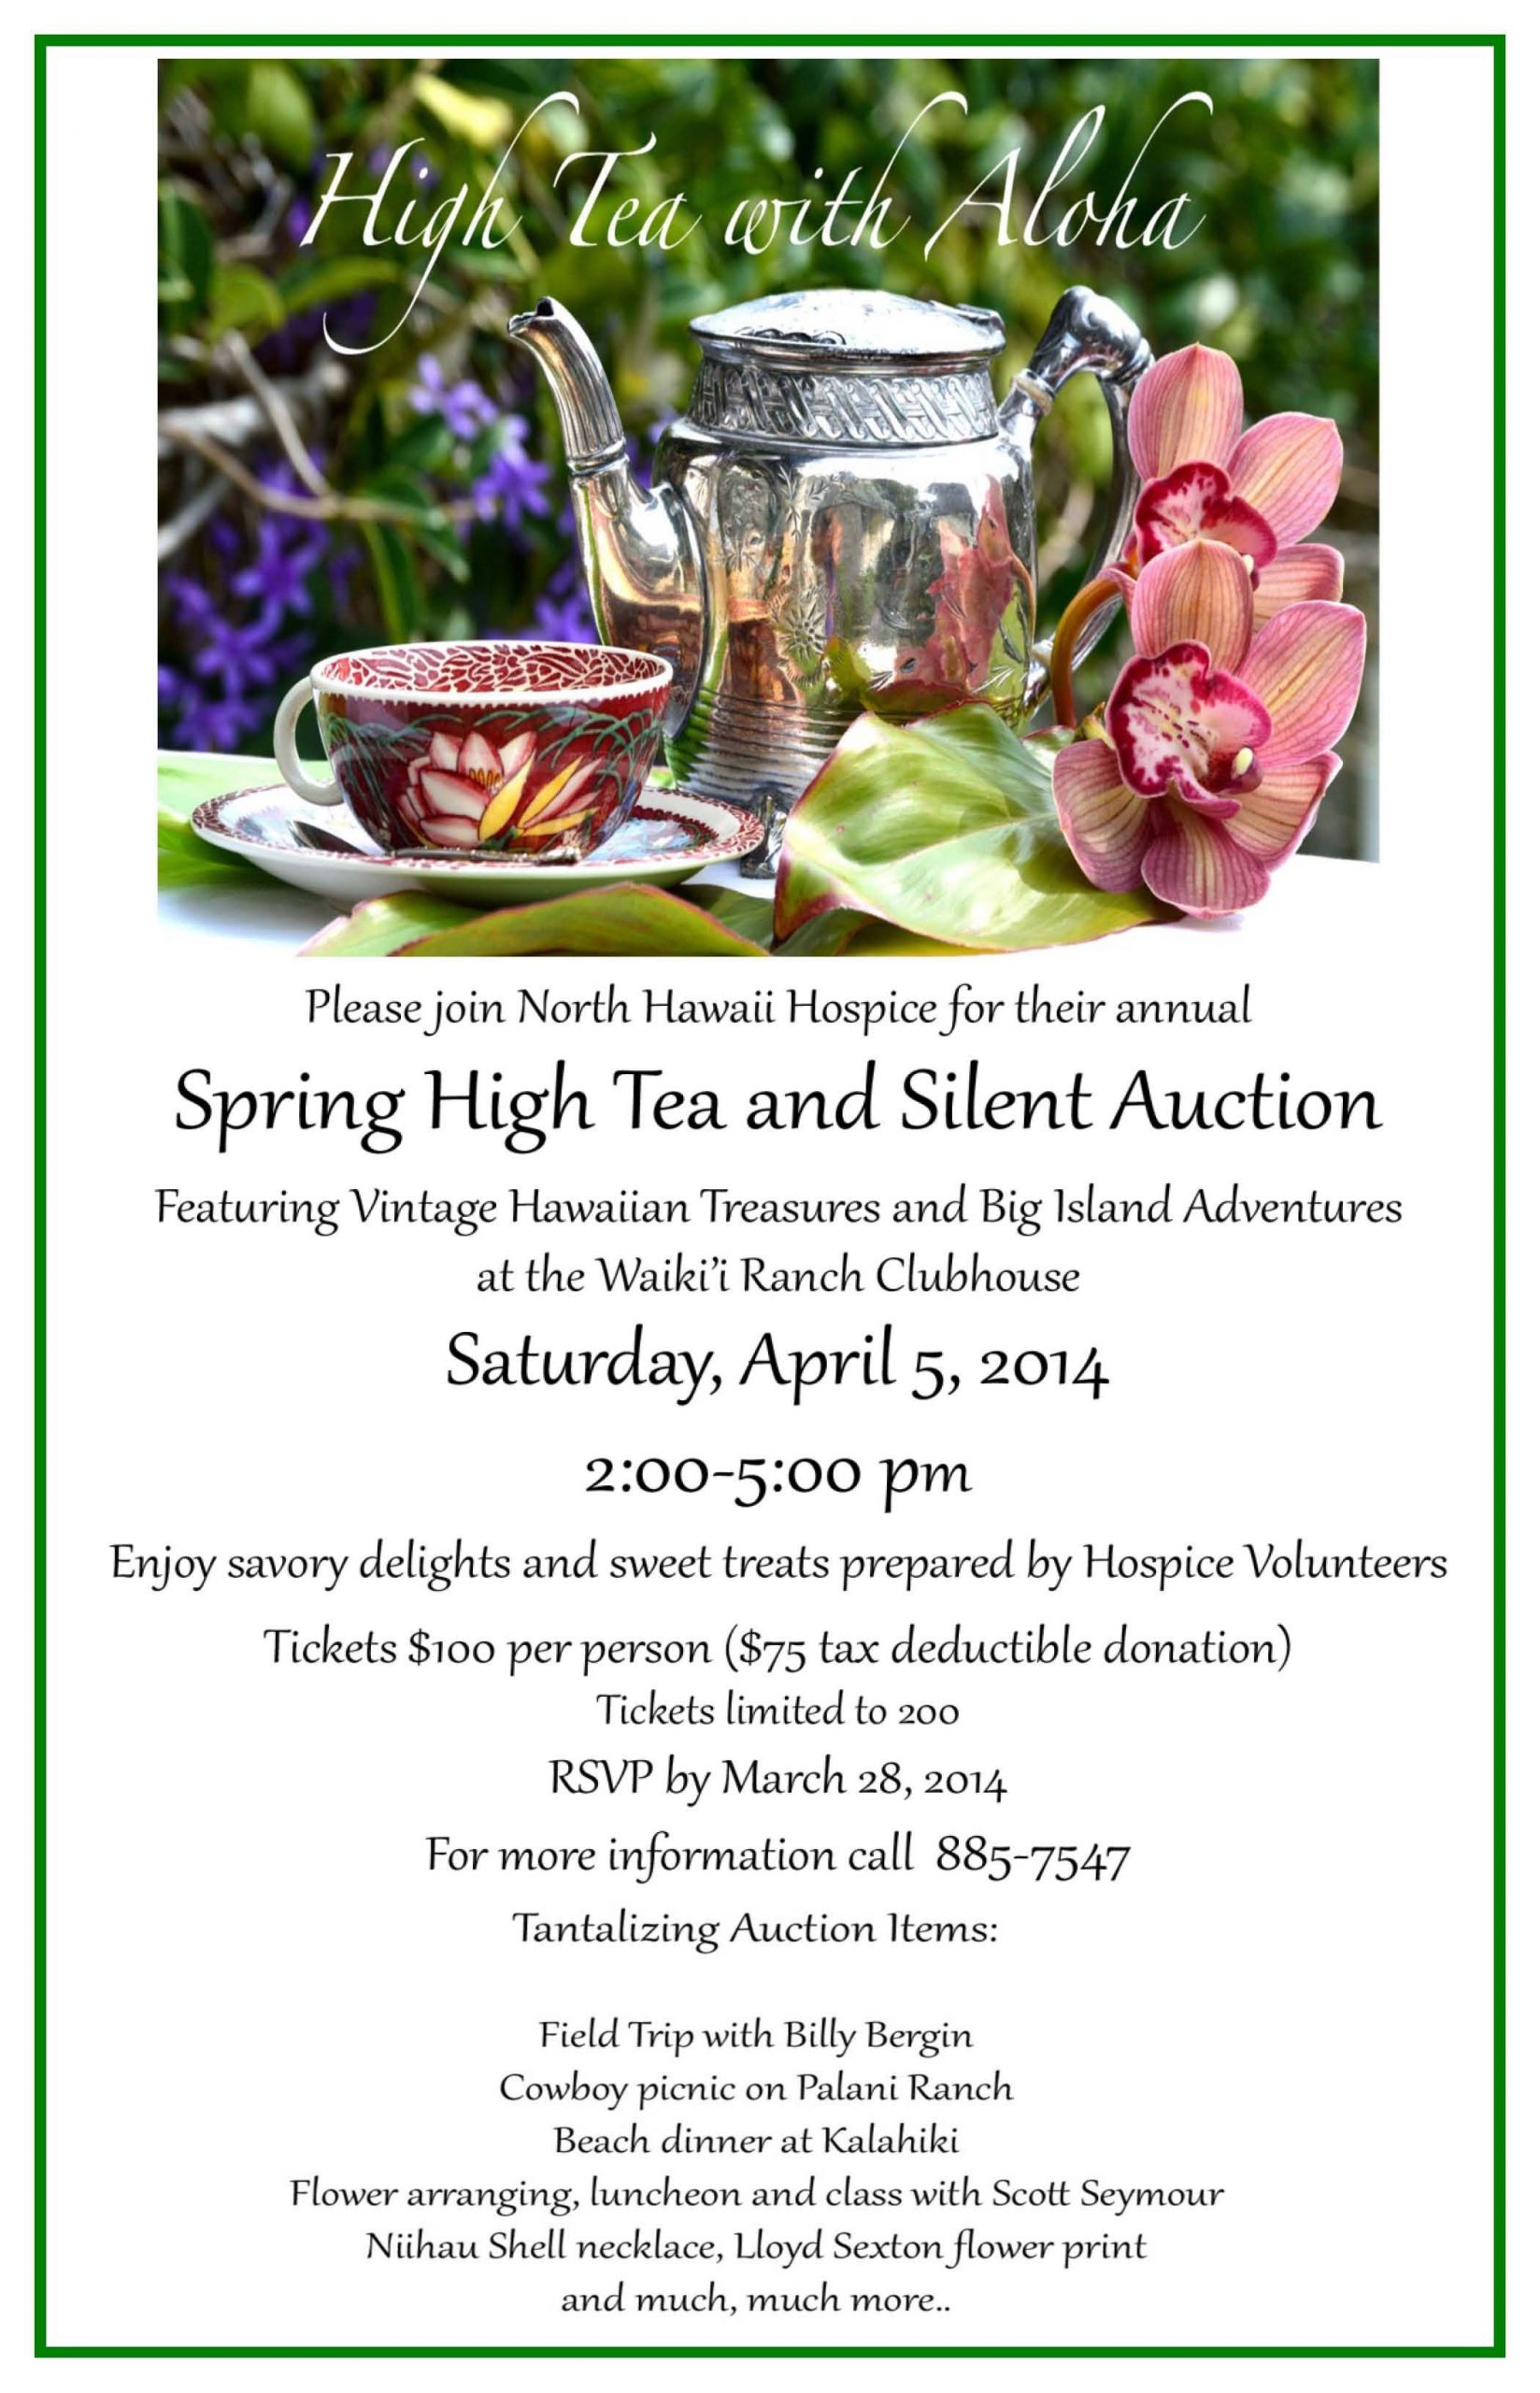 Tea Party Fundraiser Ideas
 Image result for stay at home tea fundraiser invitations